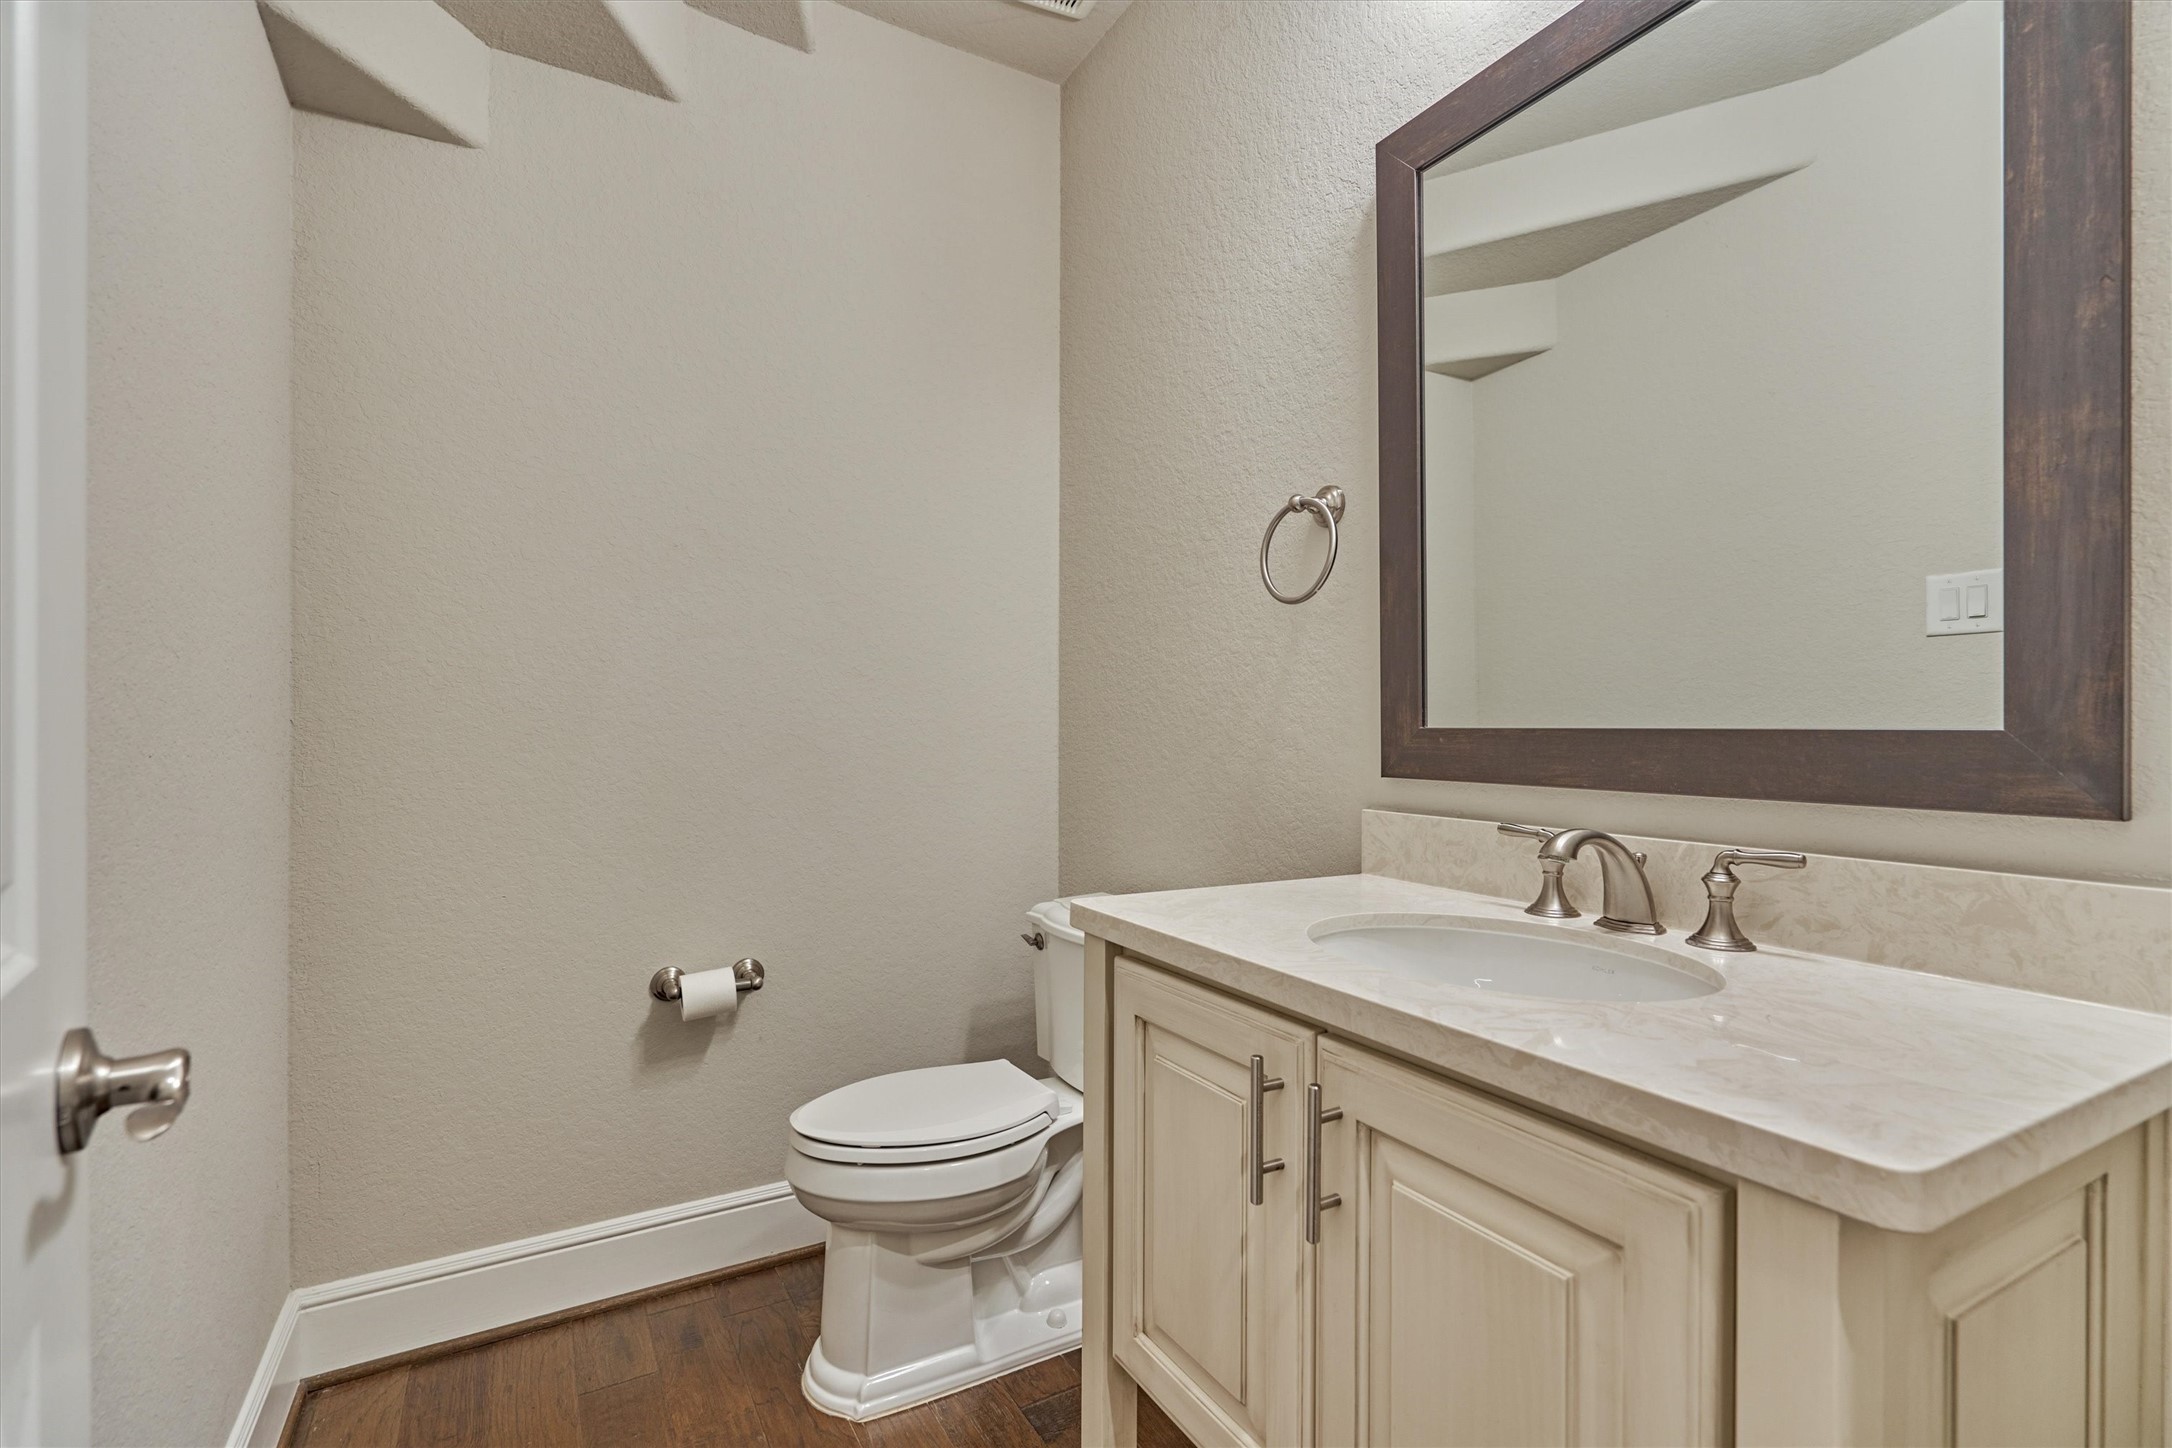 The powder room is ideal for any guests not spending the night.
